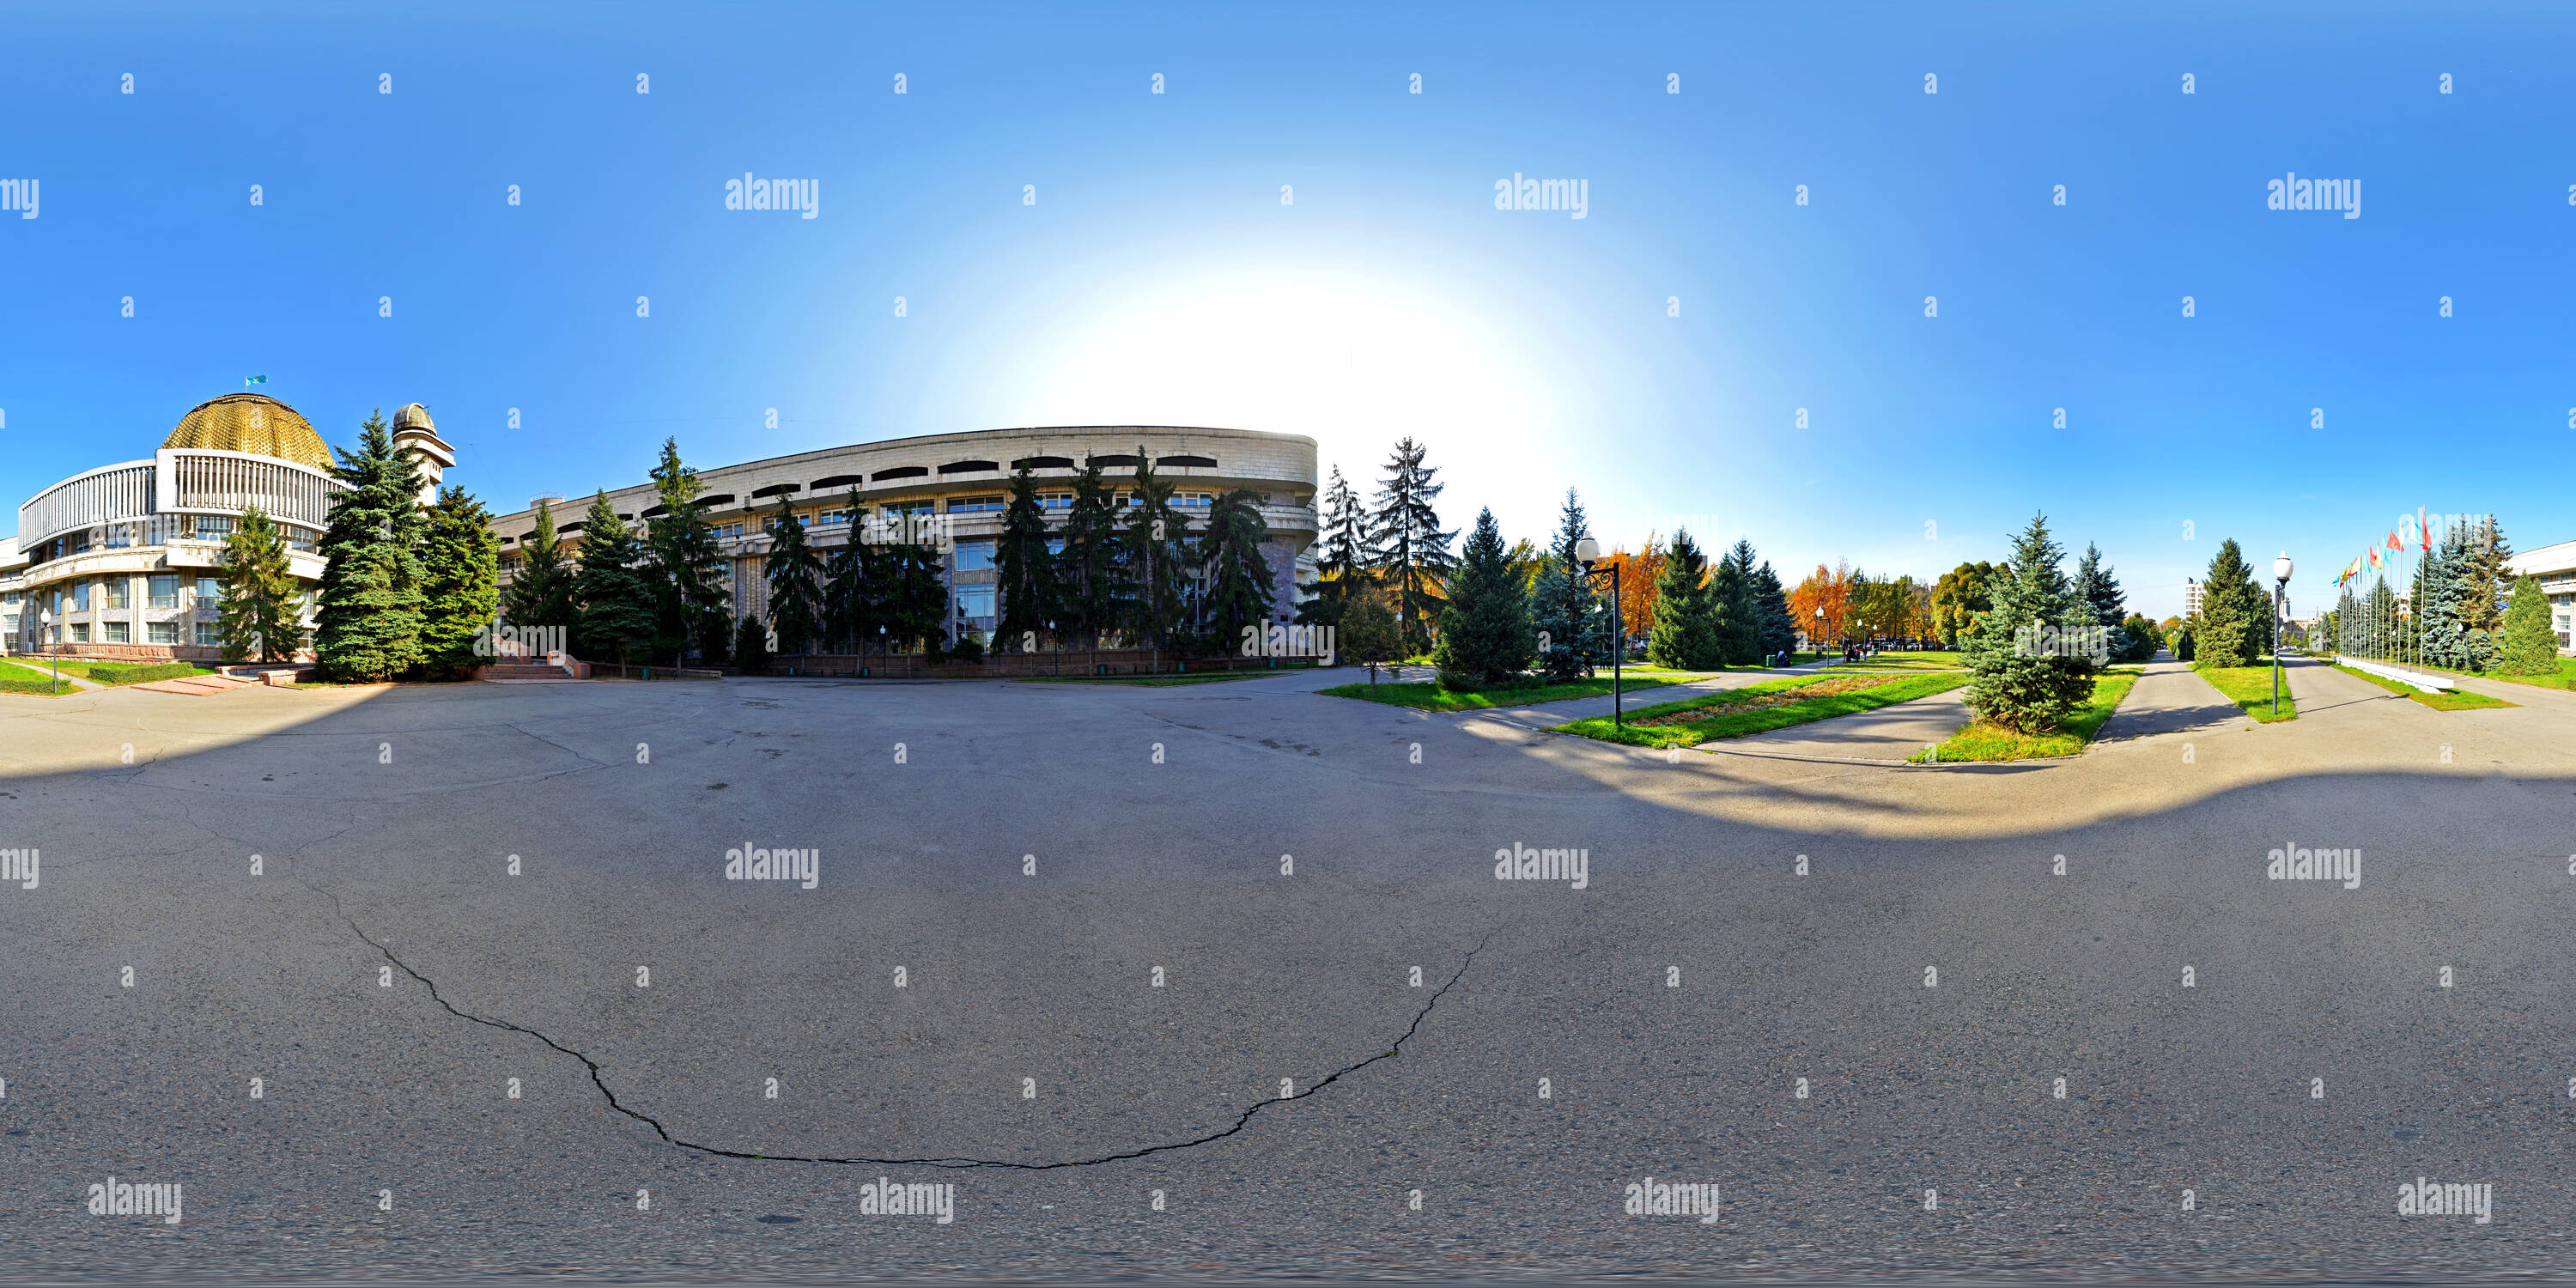 360 degree panoramic view of Almaty Children's Republican Palace